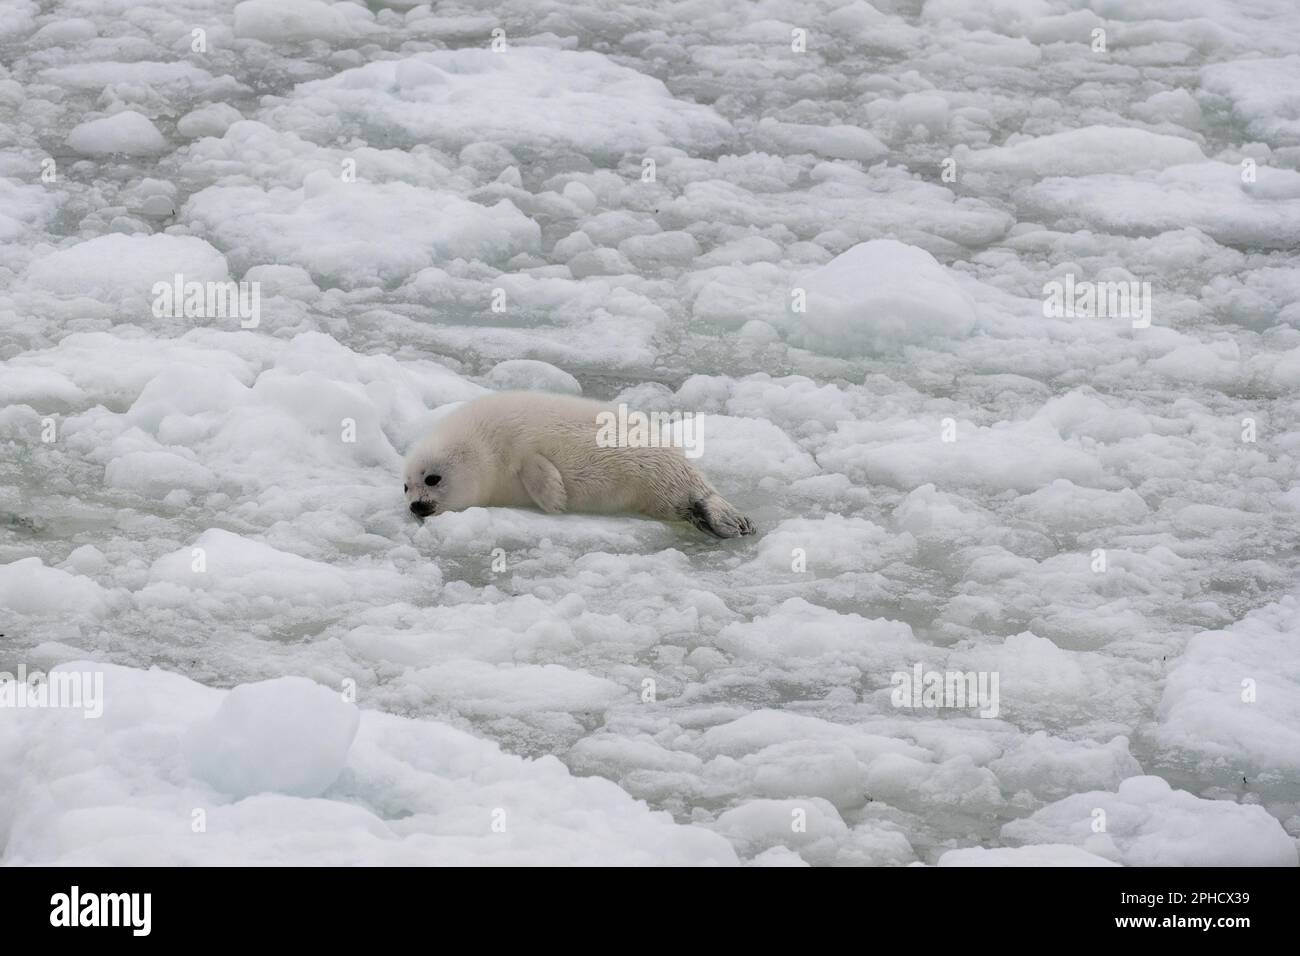 A small baby white coat harp seal or harbor seal floating on white snow and slop ice. The wild gray seal has long whiskers, a sad face, light-colored fur Stock Photo